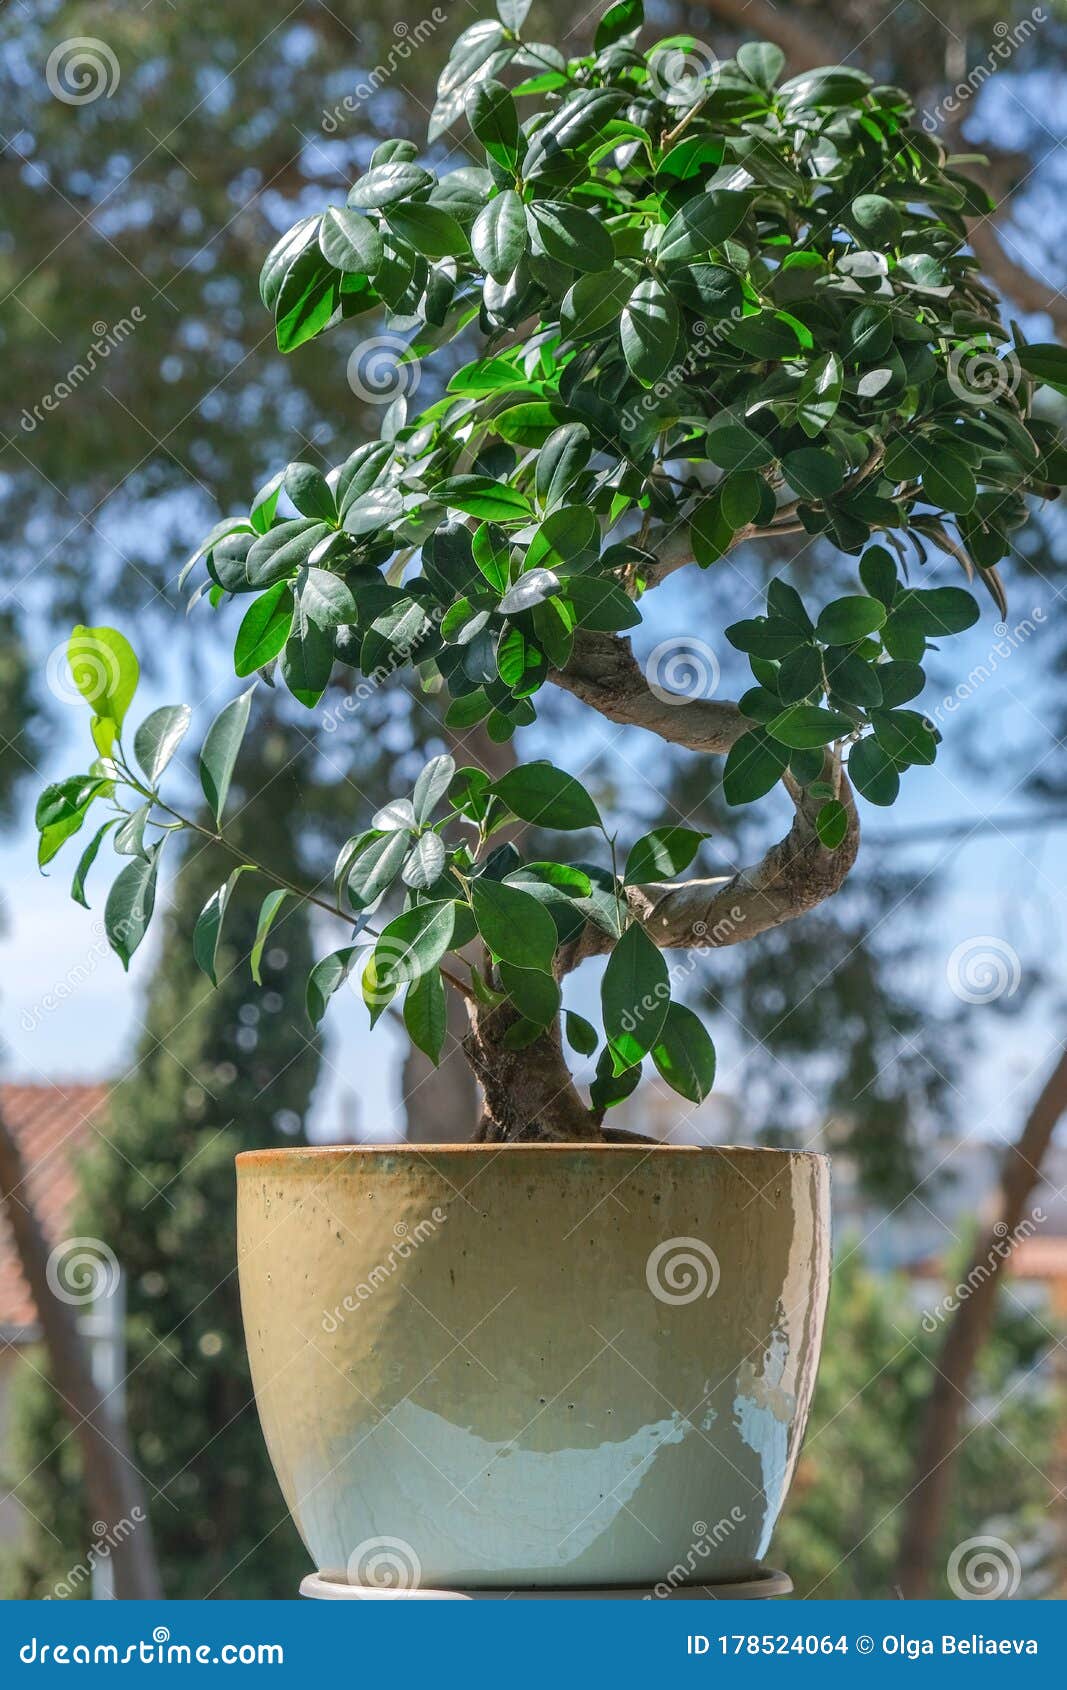 Ficus Ginseng Bonsai Tree in a Pot on the Sun on Blurred ...